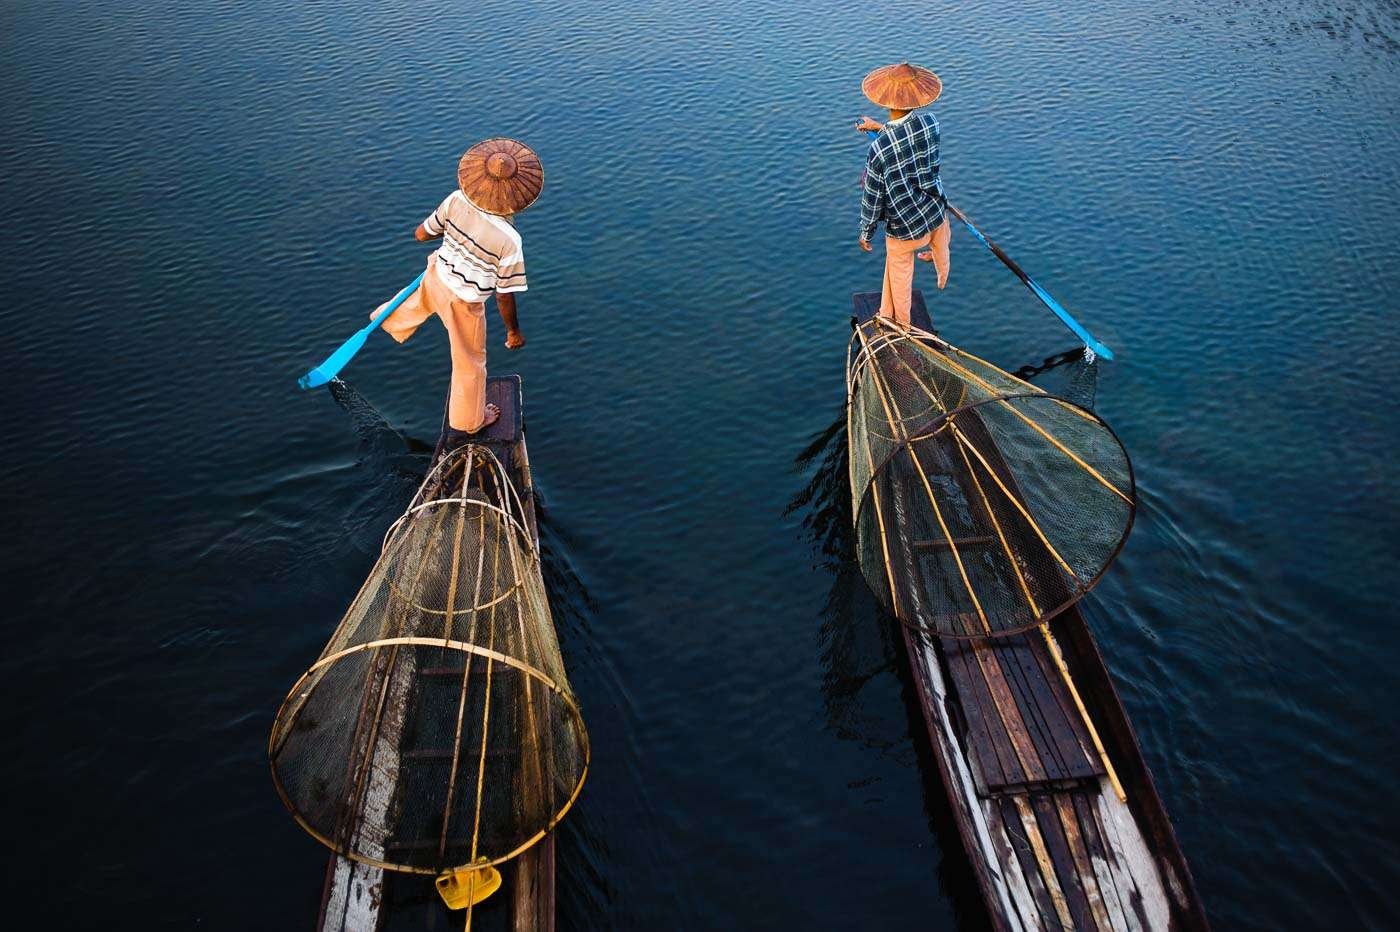 The famous fishermen on Inle Lake.